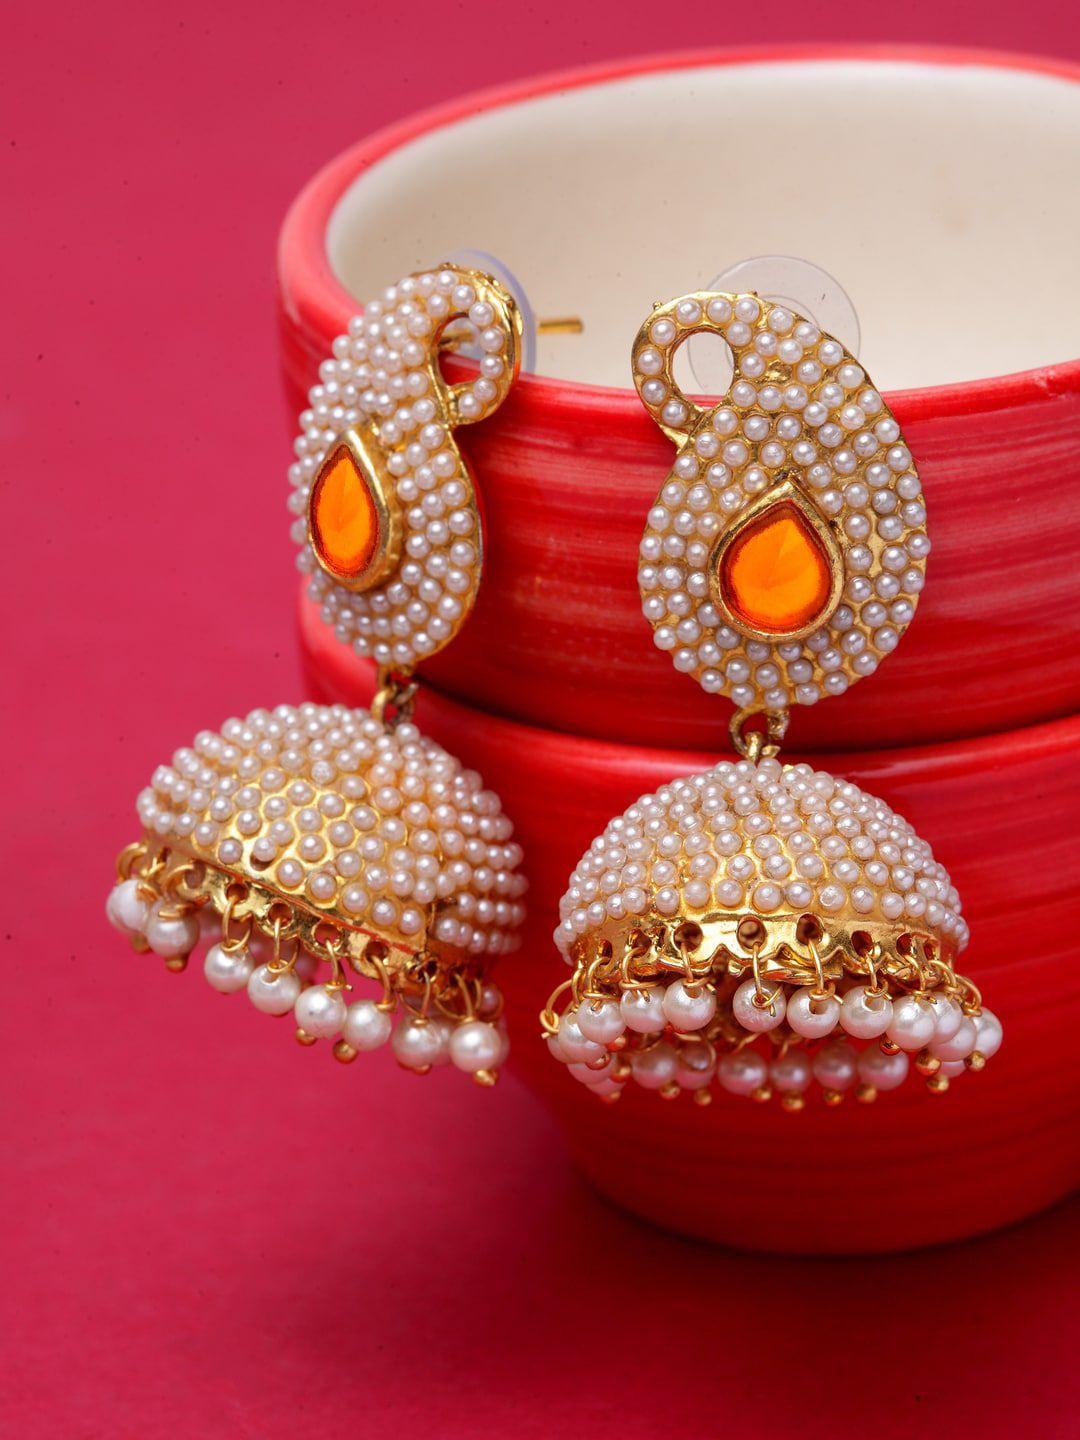 anikas creation off-white gold plated handcrafted jhumkas